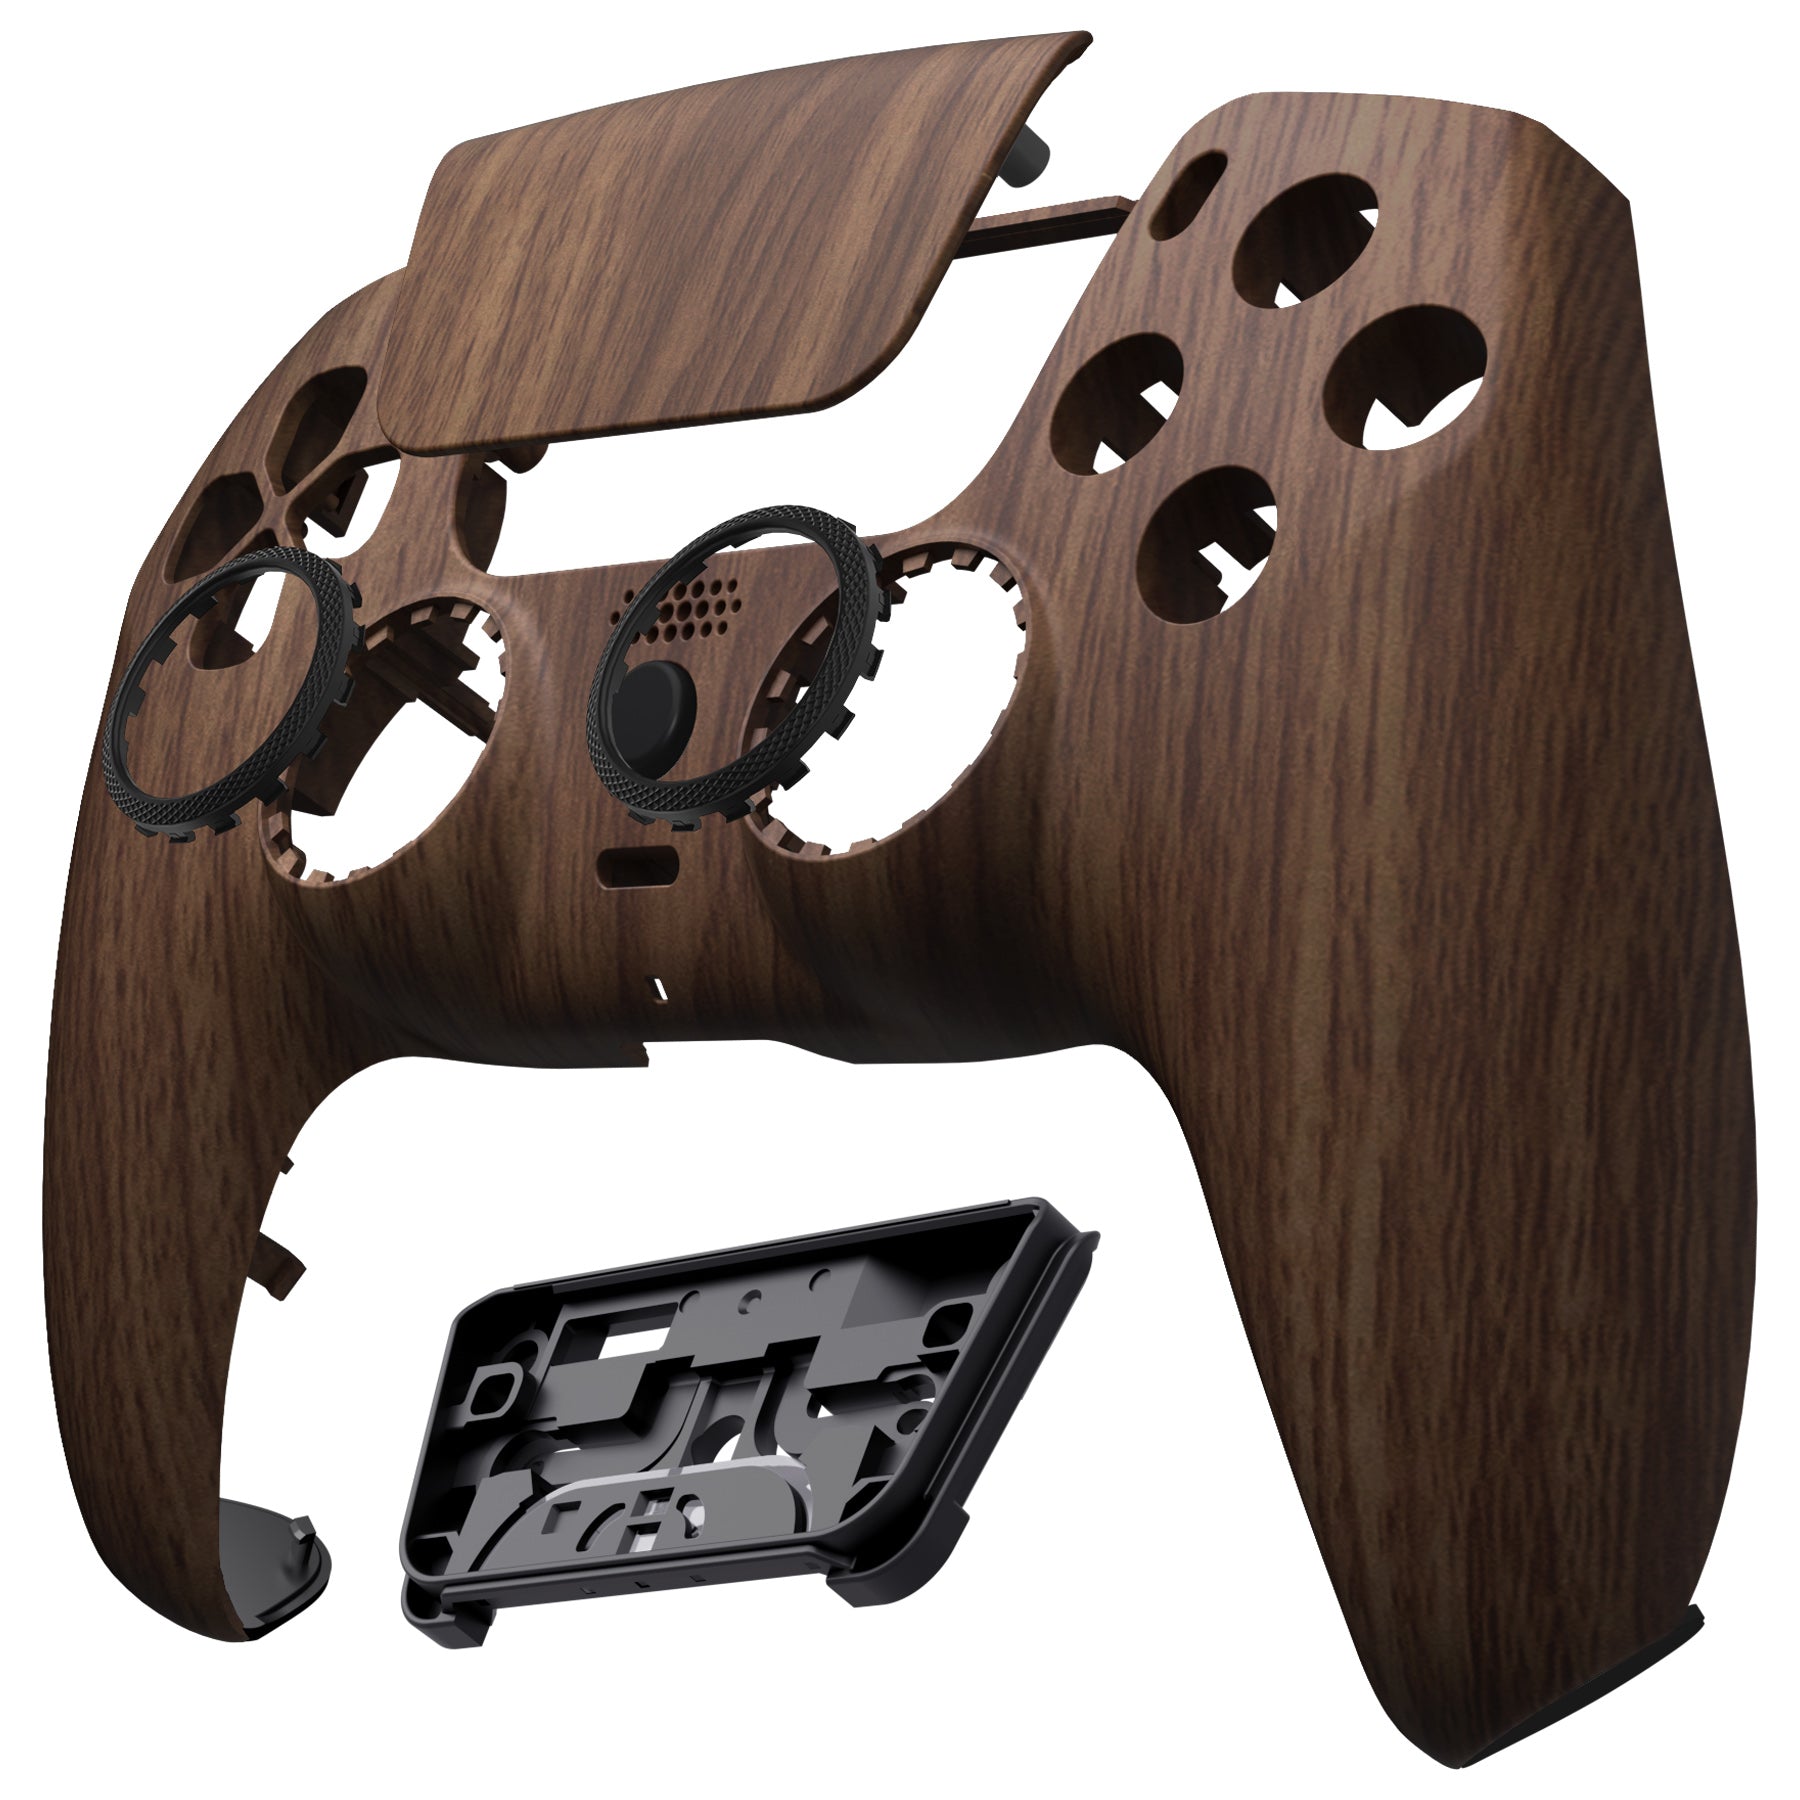 eXtremeRate Retail LUNA Redesigned Wood Grain Front Shell Touchpad Compatible with ps5 Controller BDM-010 BDM-020 BDM-030, DIY Replacement Housing Custom Touch Pad Cover Compatible with ps5 Controller - GHPFS002